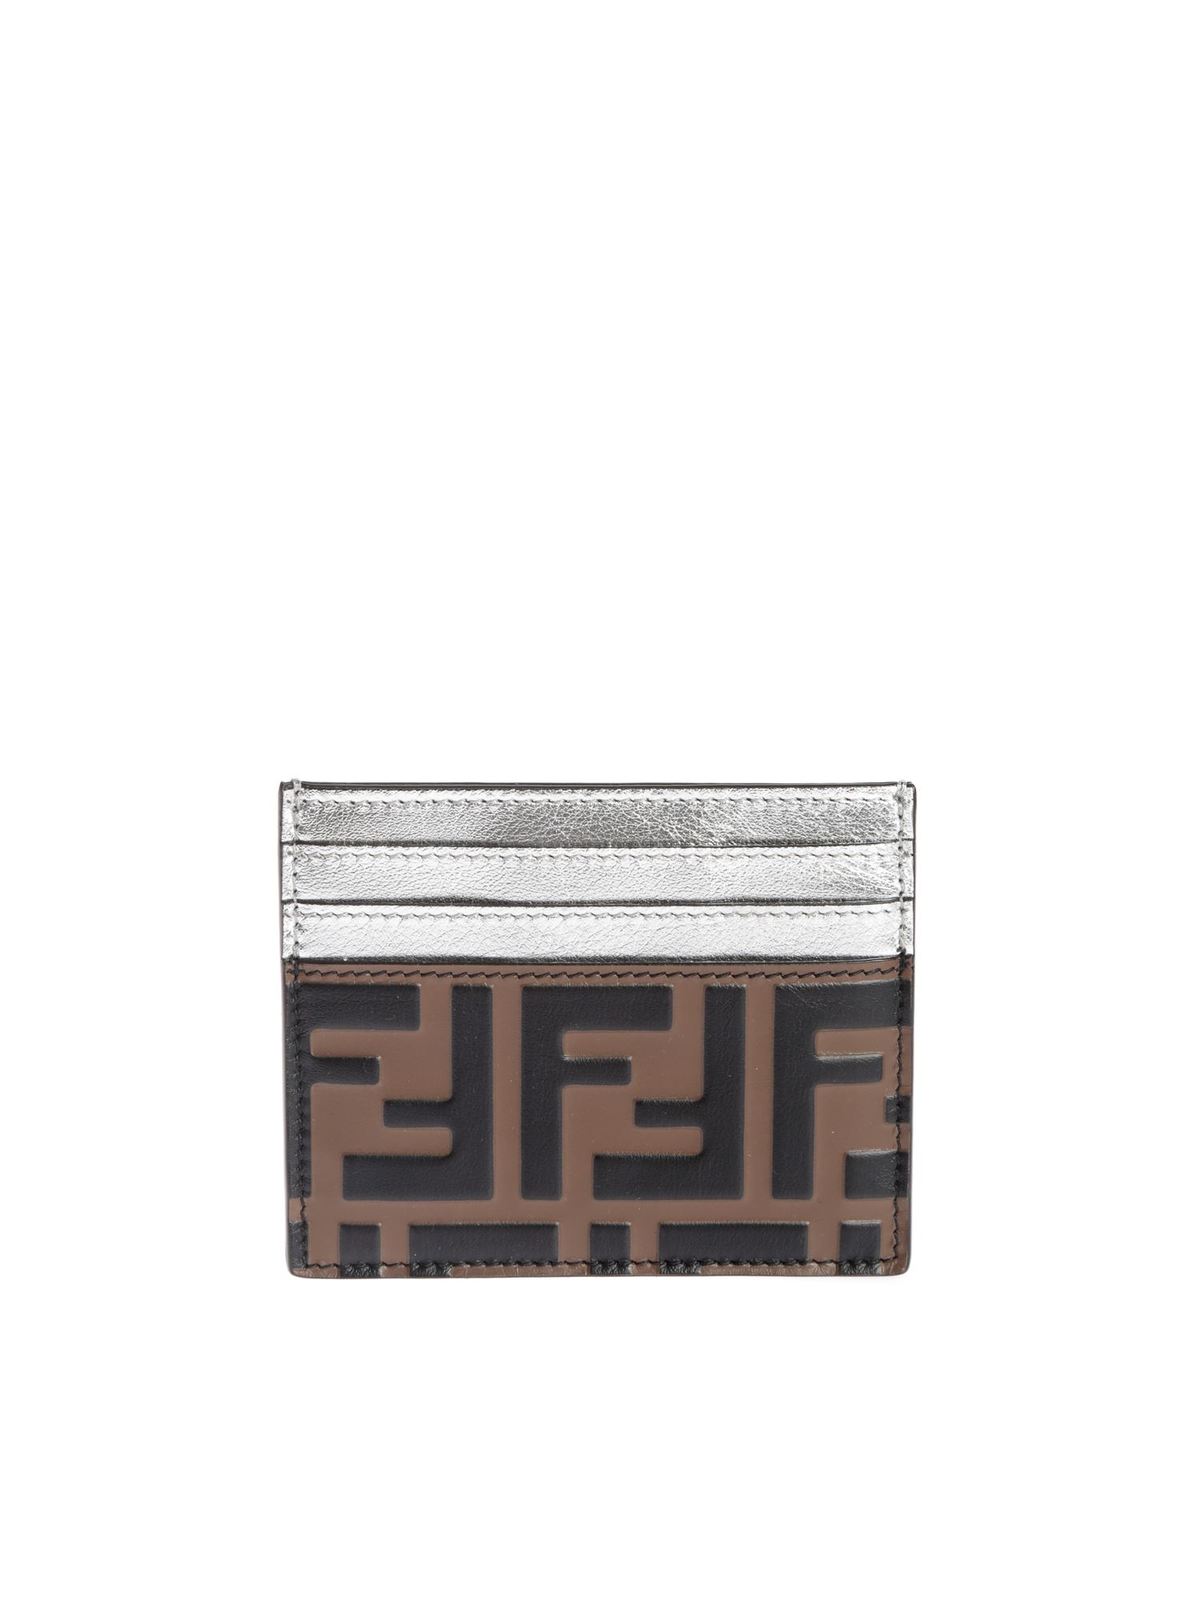 FENDI FF MOTIF CARD HOLDER IN BROWN AND SILVER